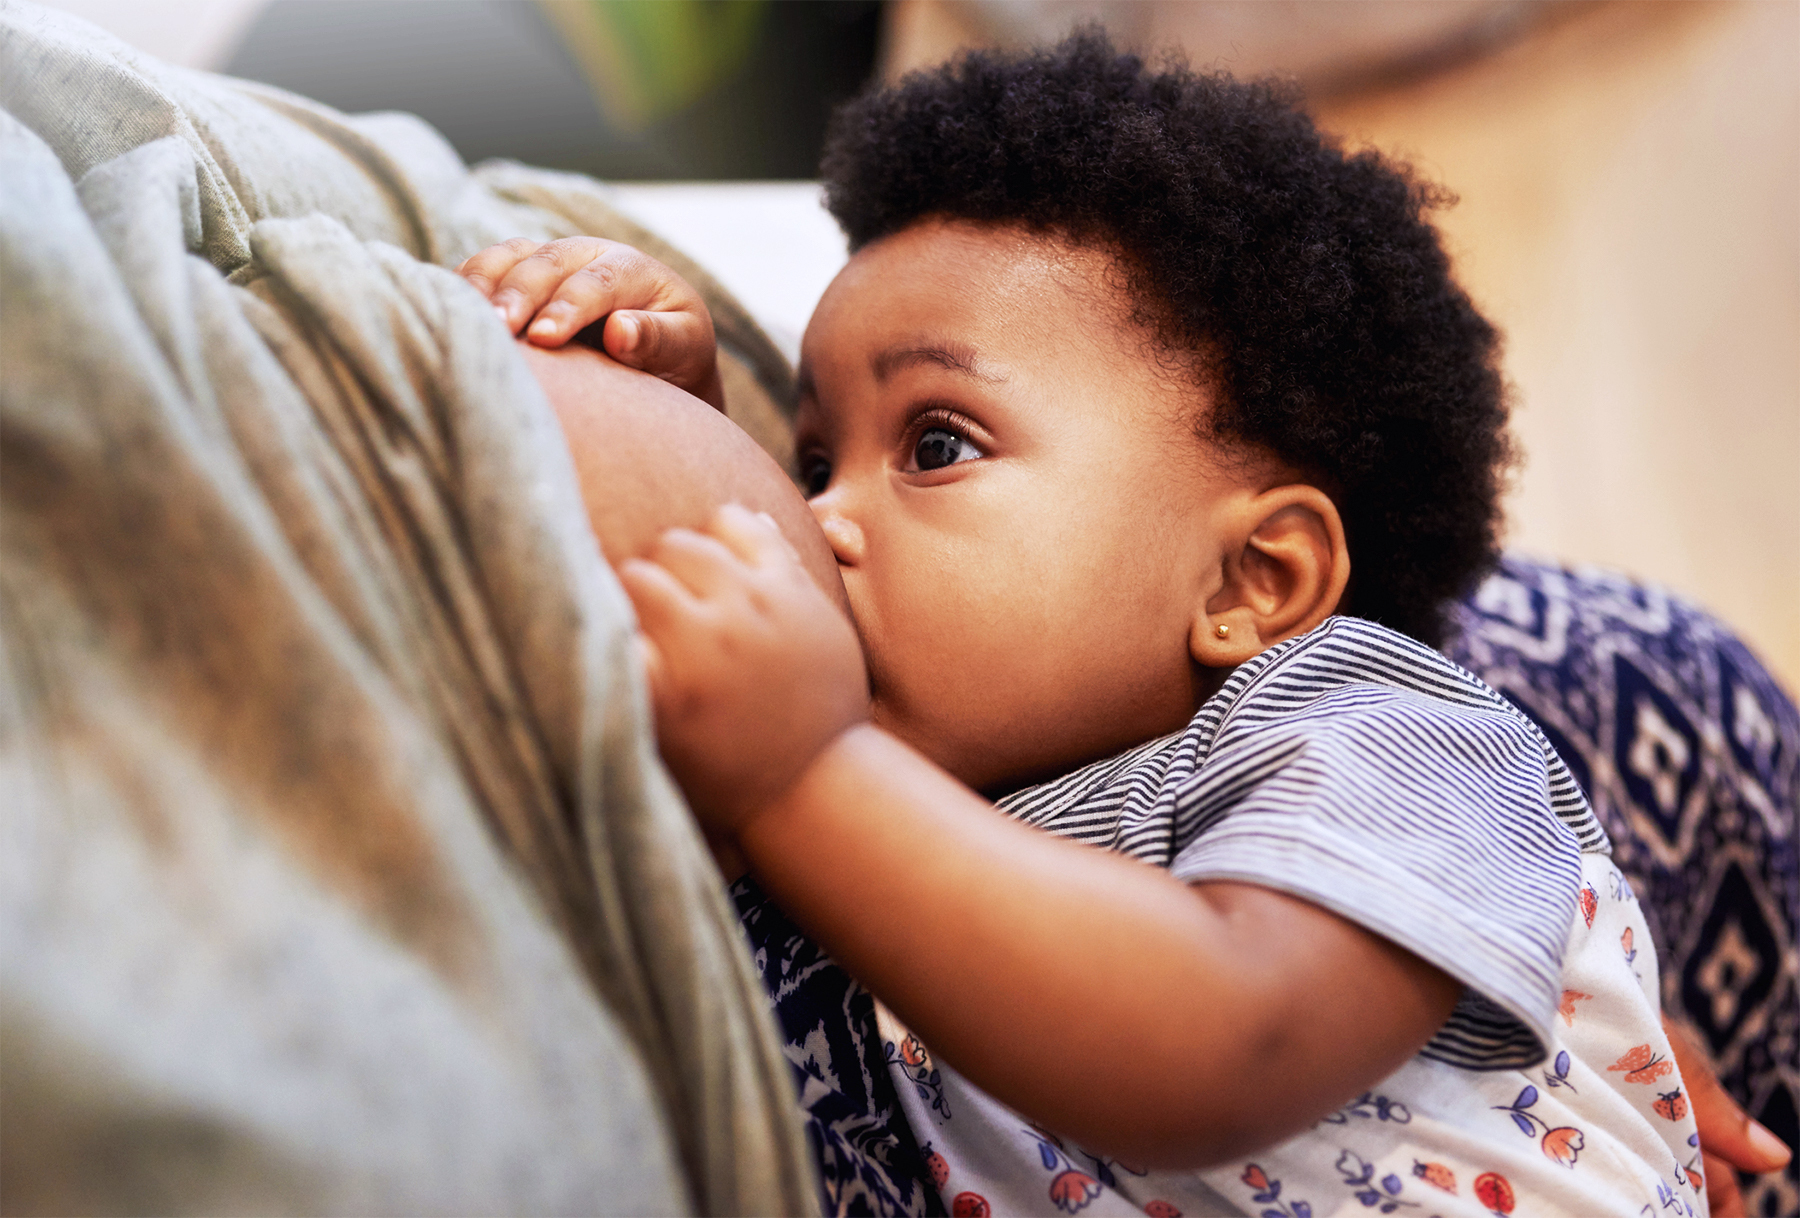 The Dos and Don'ts of Breastfeeding